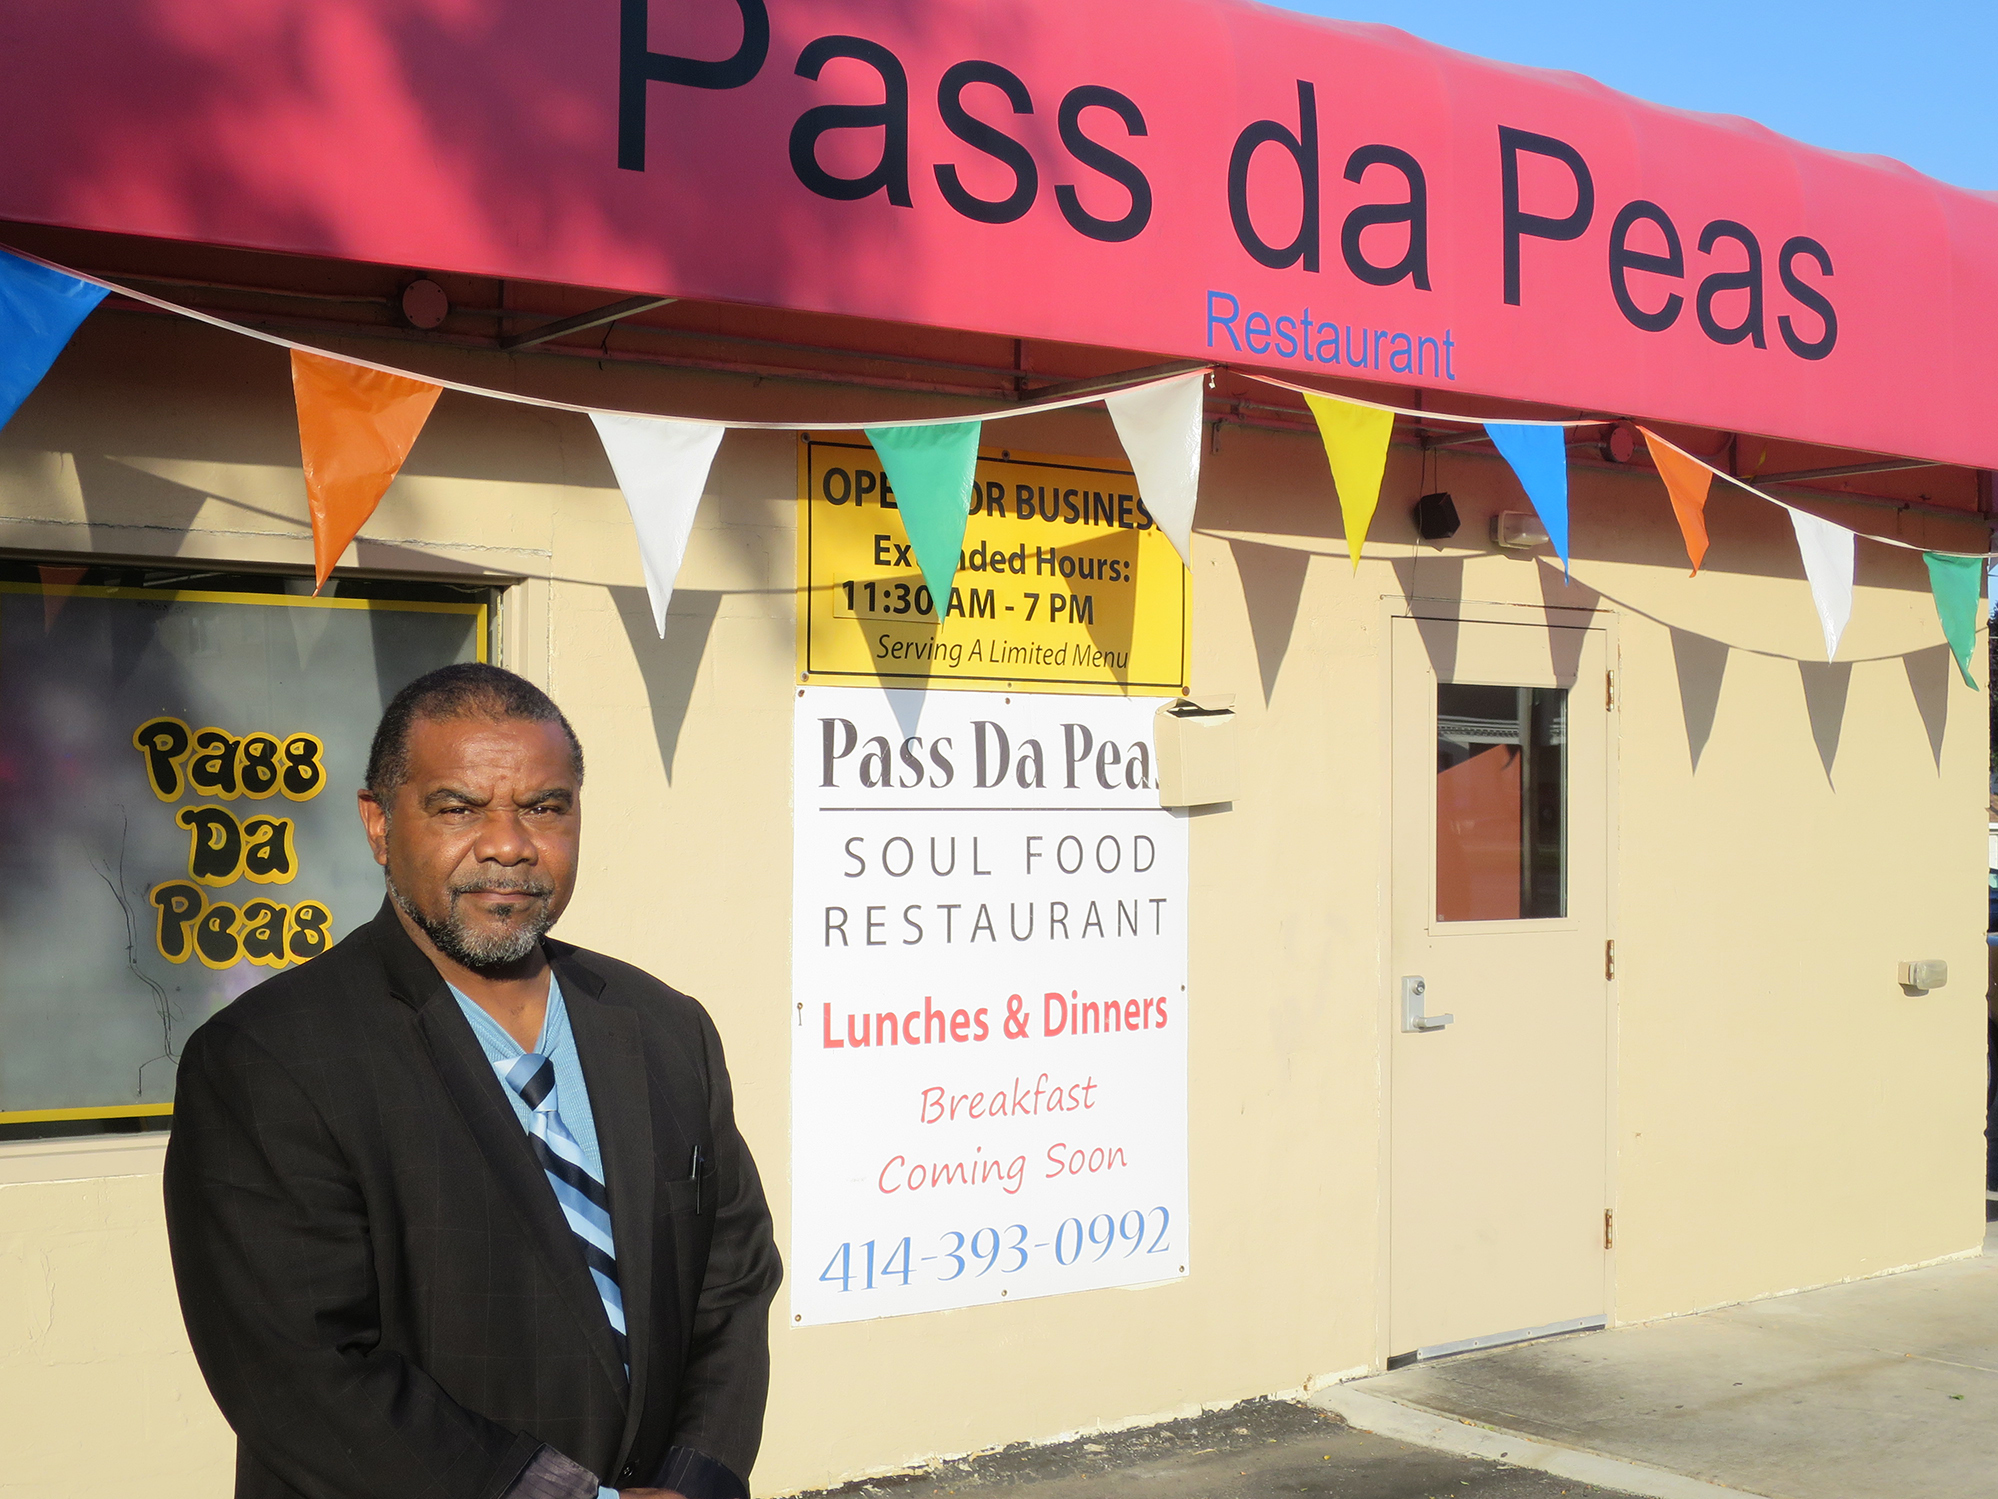 Thromentta Anderson, the owner of Pass Da Peas in northwest Milwaukee likes to greet customers by name and give them tokens toward free drinks. But he was glad to see new faces during Black Restaurant Week.